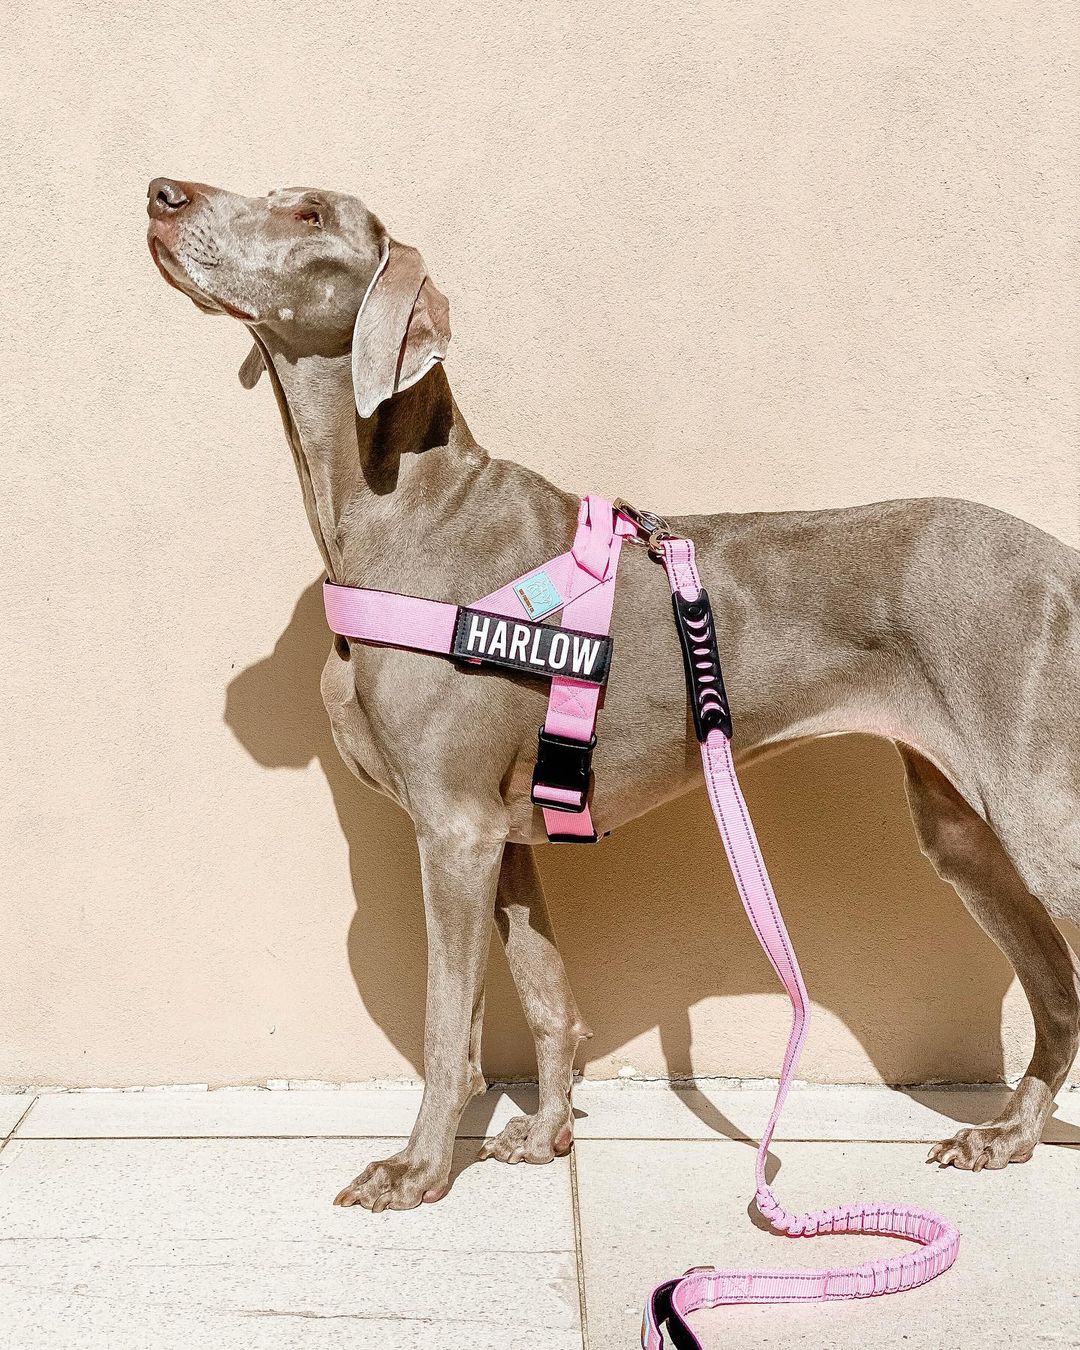 dog wearing a pink harness